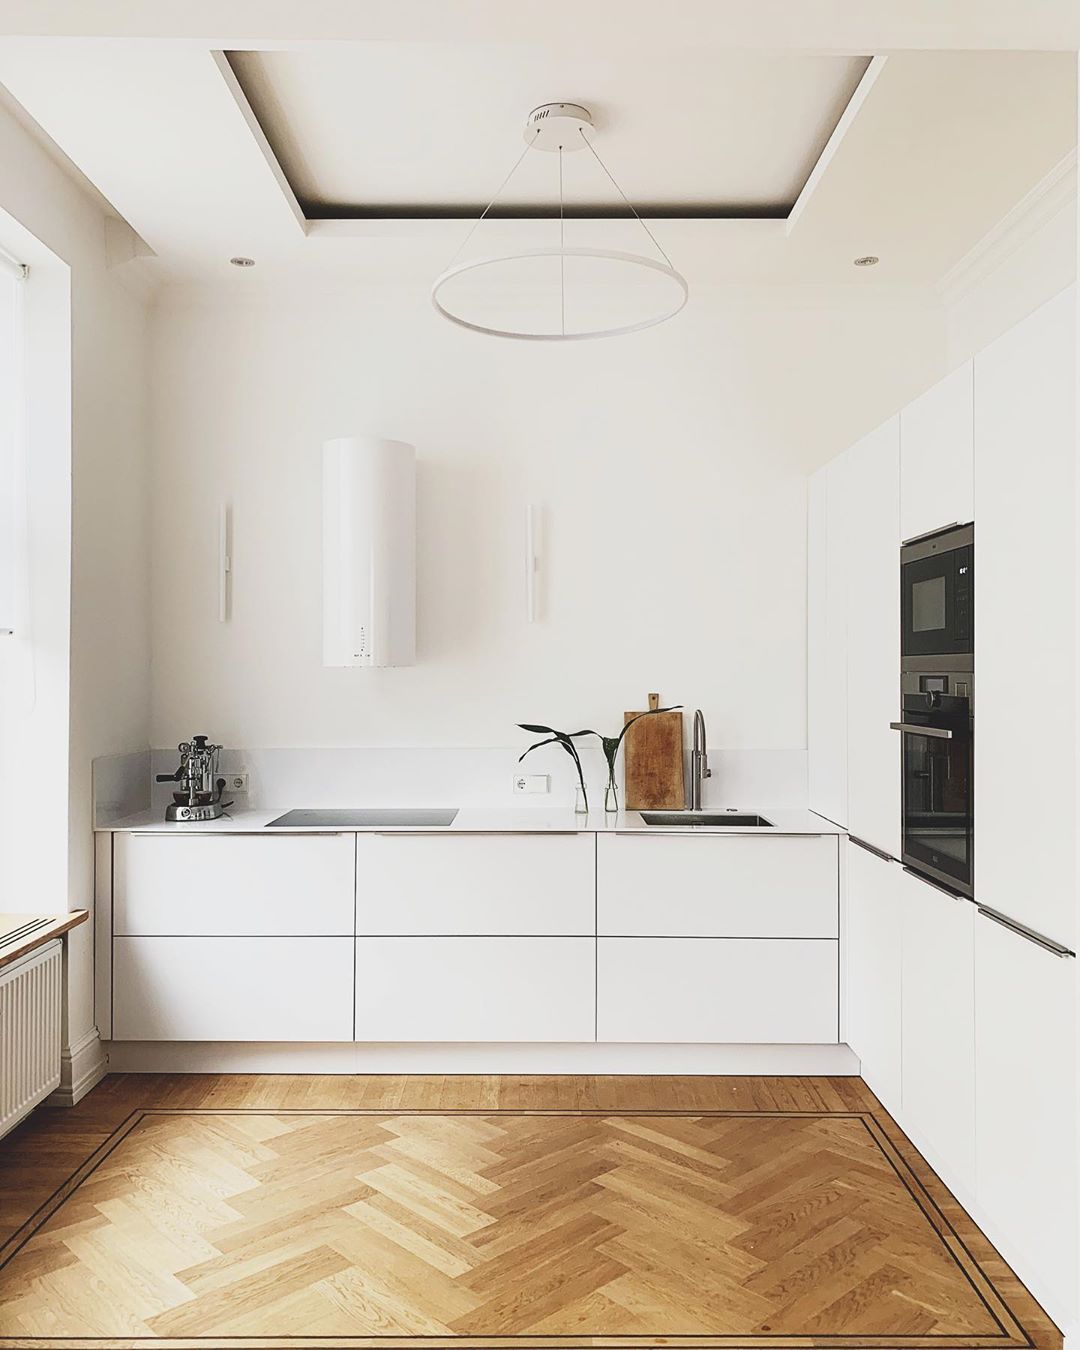 Minimalist kitchen with white walls, white cabinets, and wood floors. Photo by Instagram user @thneu